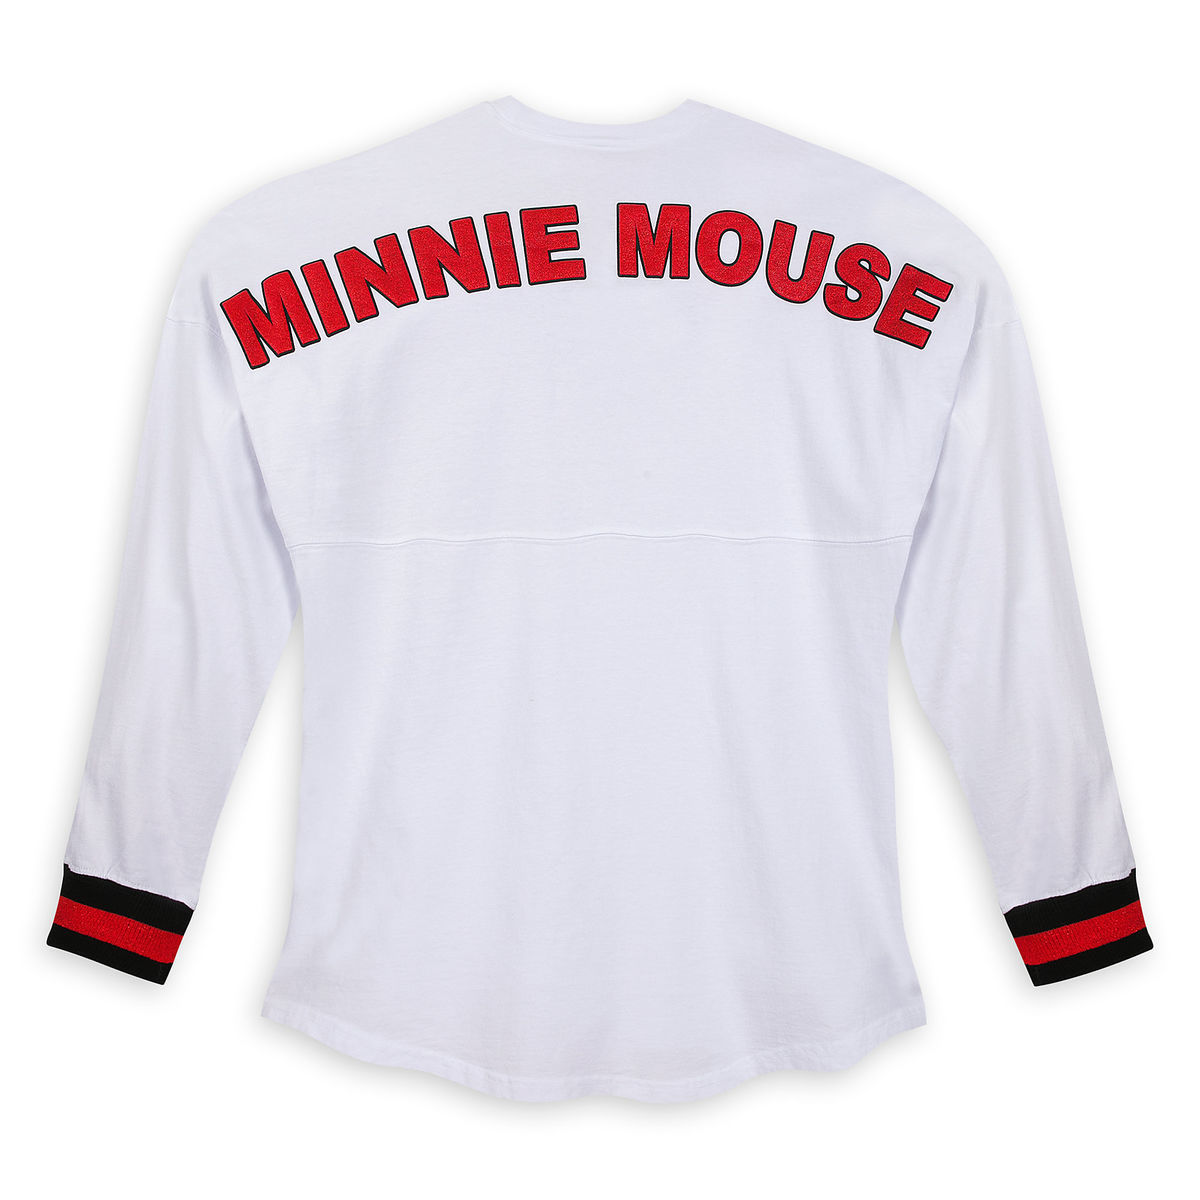 New Spirit Jerseys Now Available From Disney Store and shopDisney